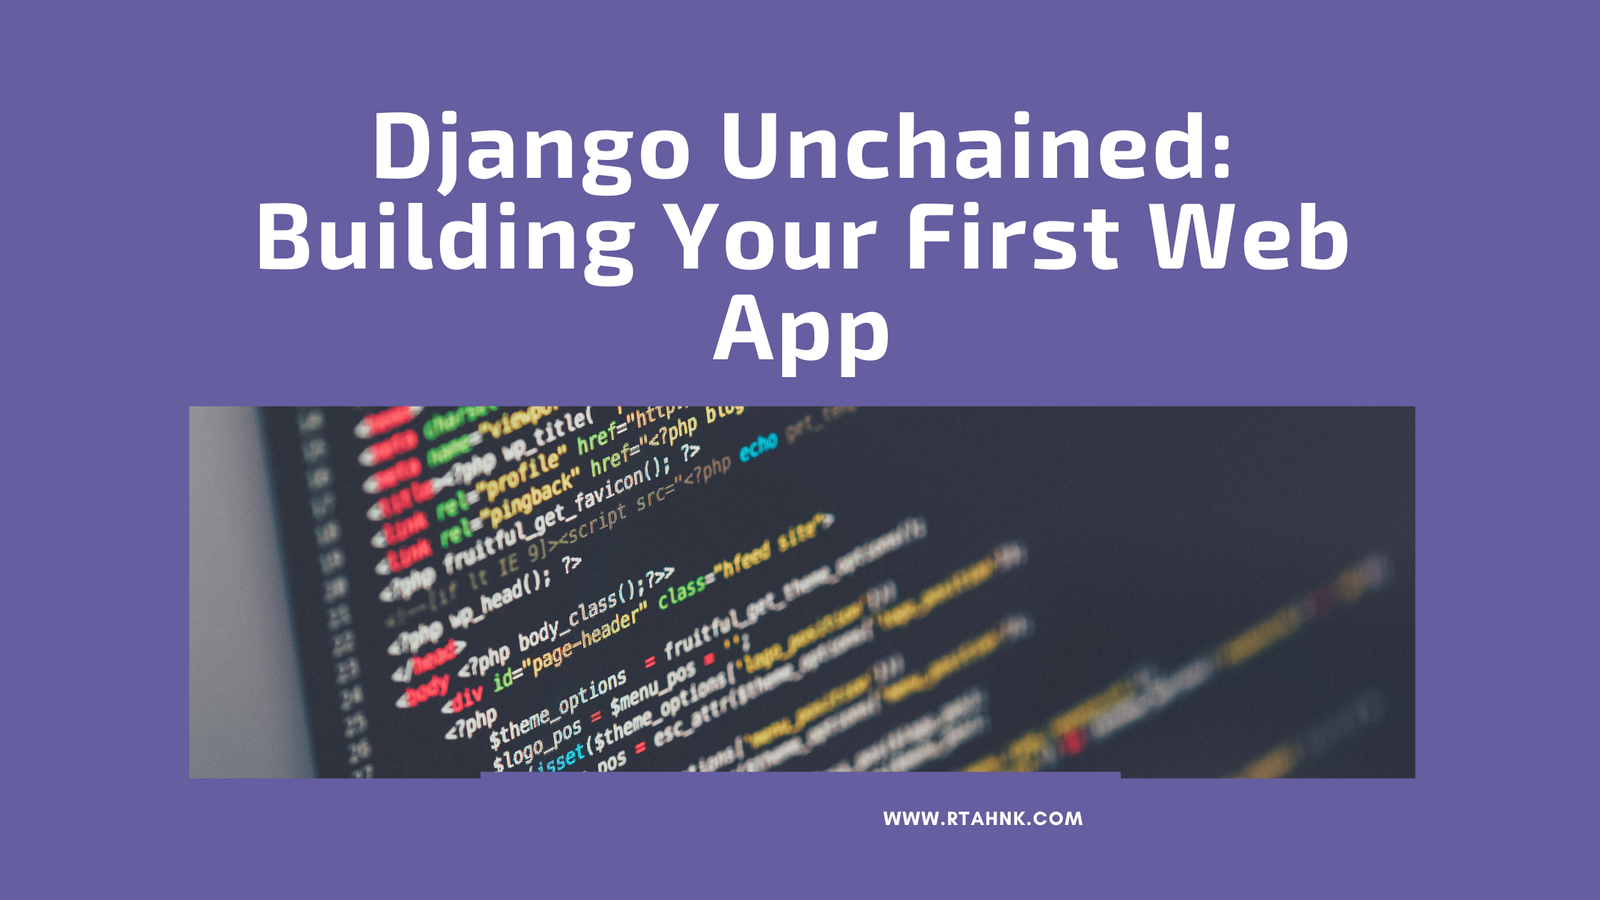 Django Unchained: Building Your First Web App